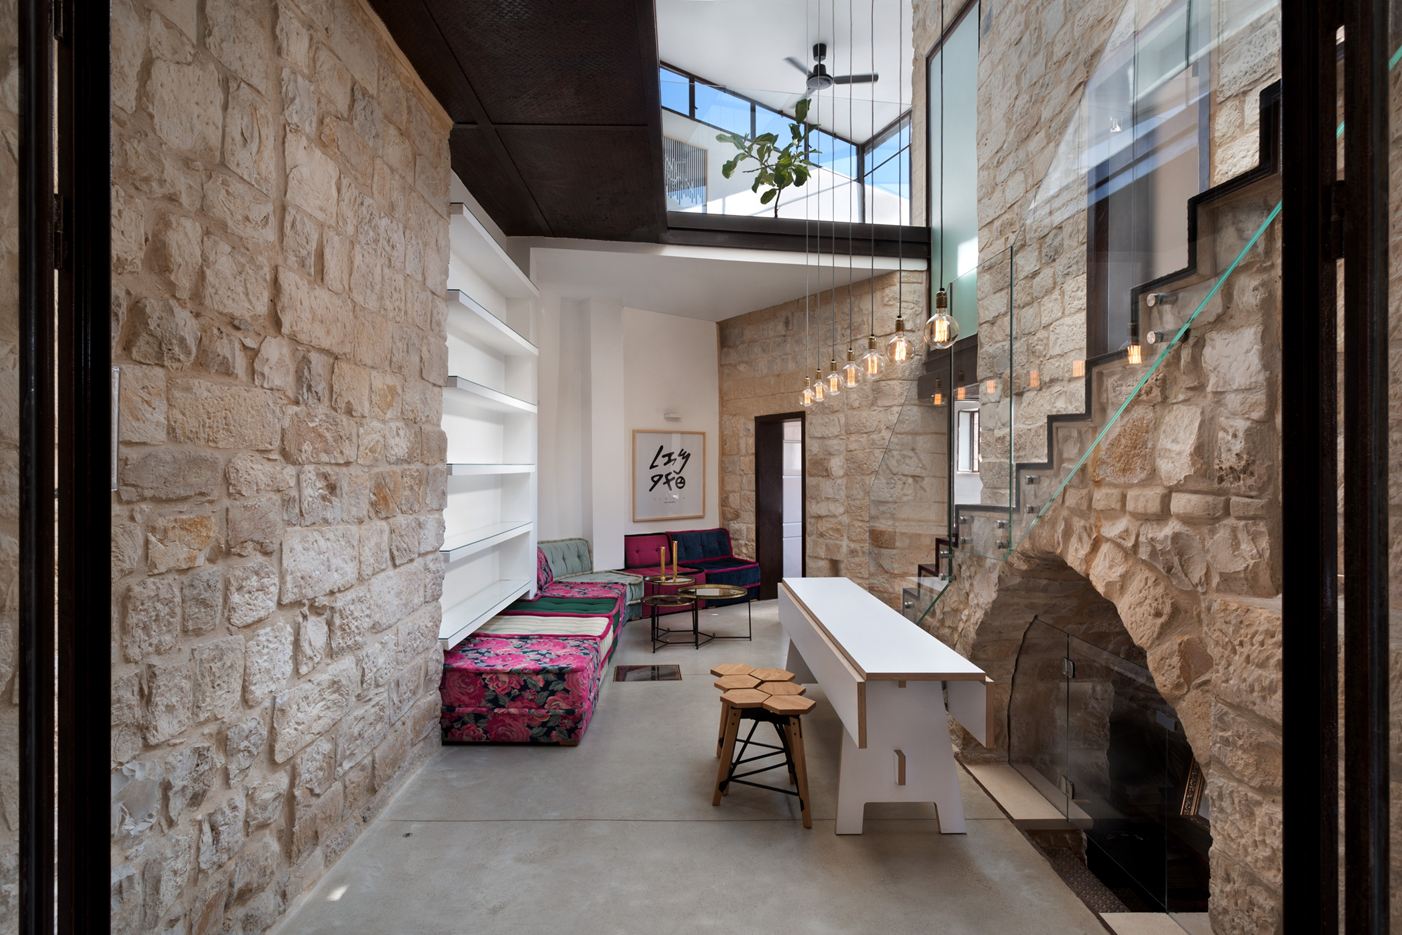 The Reflection House in Safed, Israel by Henkin Shavit Architecture & Design